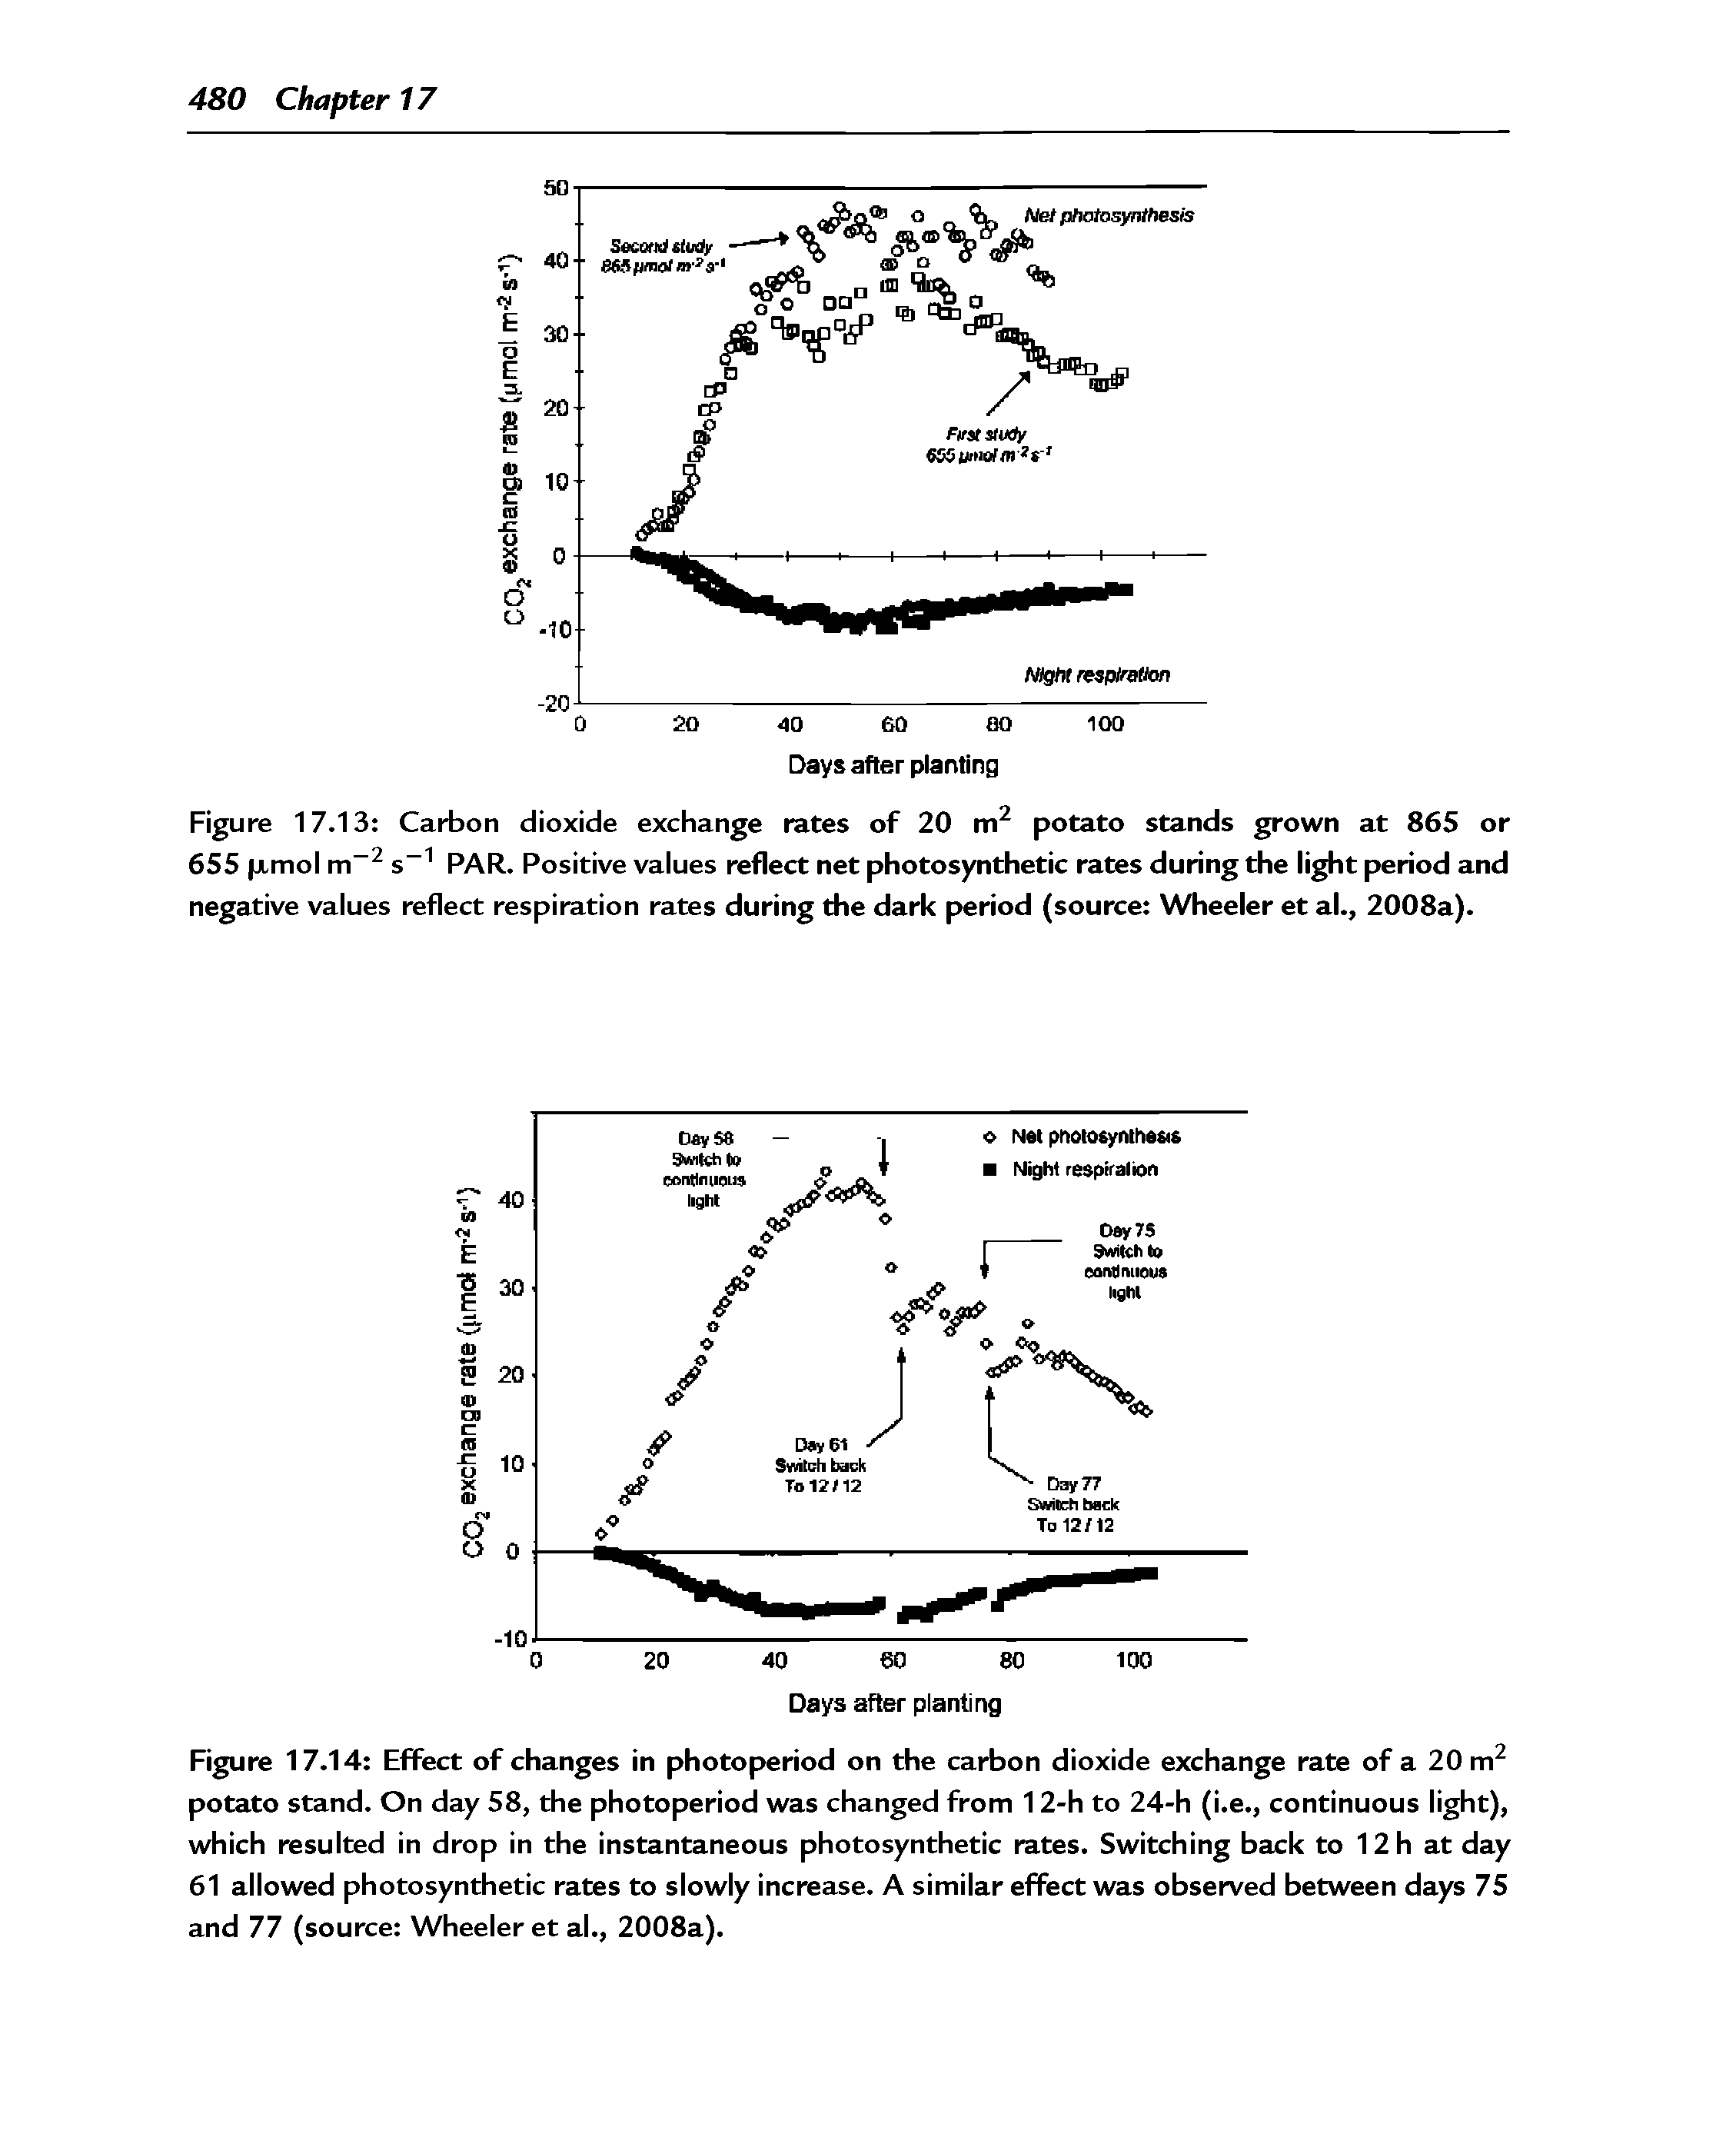 Figure 17.14 Effect of changes in photoperiod on the carbon dioxide exchange rate of a 20 potato stand. On day 58, the photoperiod was changed from 12-h to 24-h (i.e., continuous light), which resulted in drop in the instantaneous photosynthetic rates. Switching back to 12h at day 61 allowed photosynthetic rates to slowly increase. A similar effect was observed between days 75 and 77 (source Wheeler et al., 2008a).